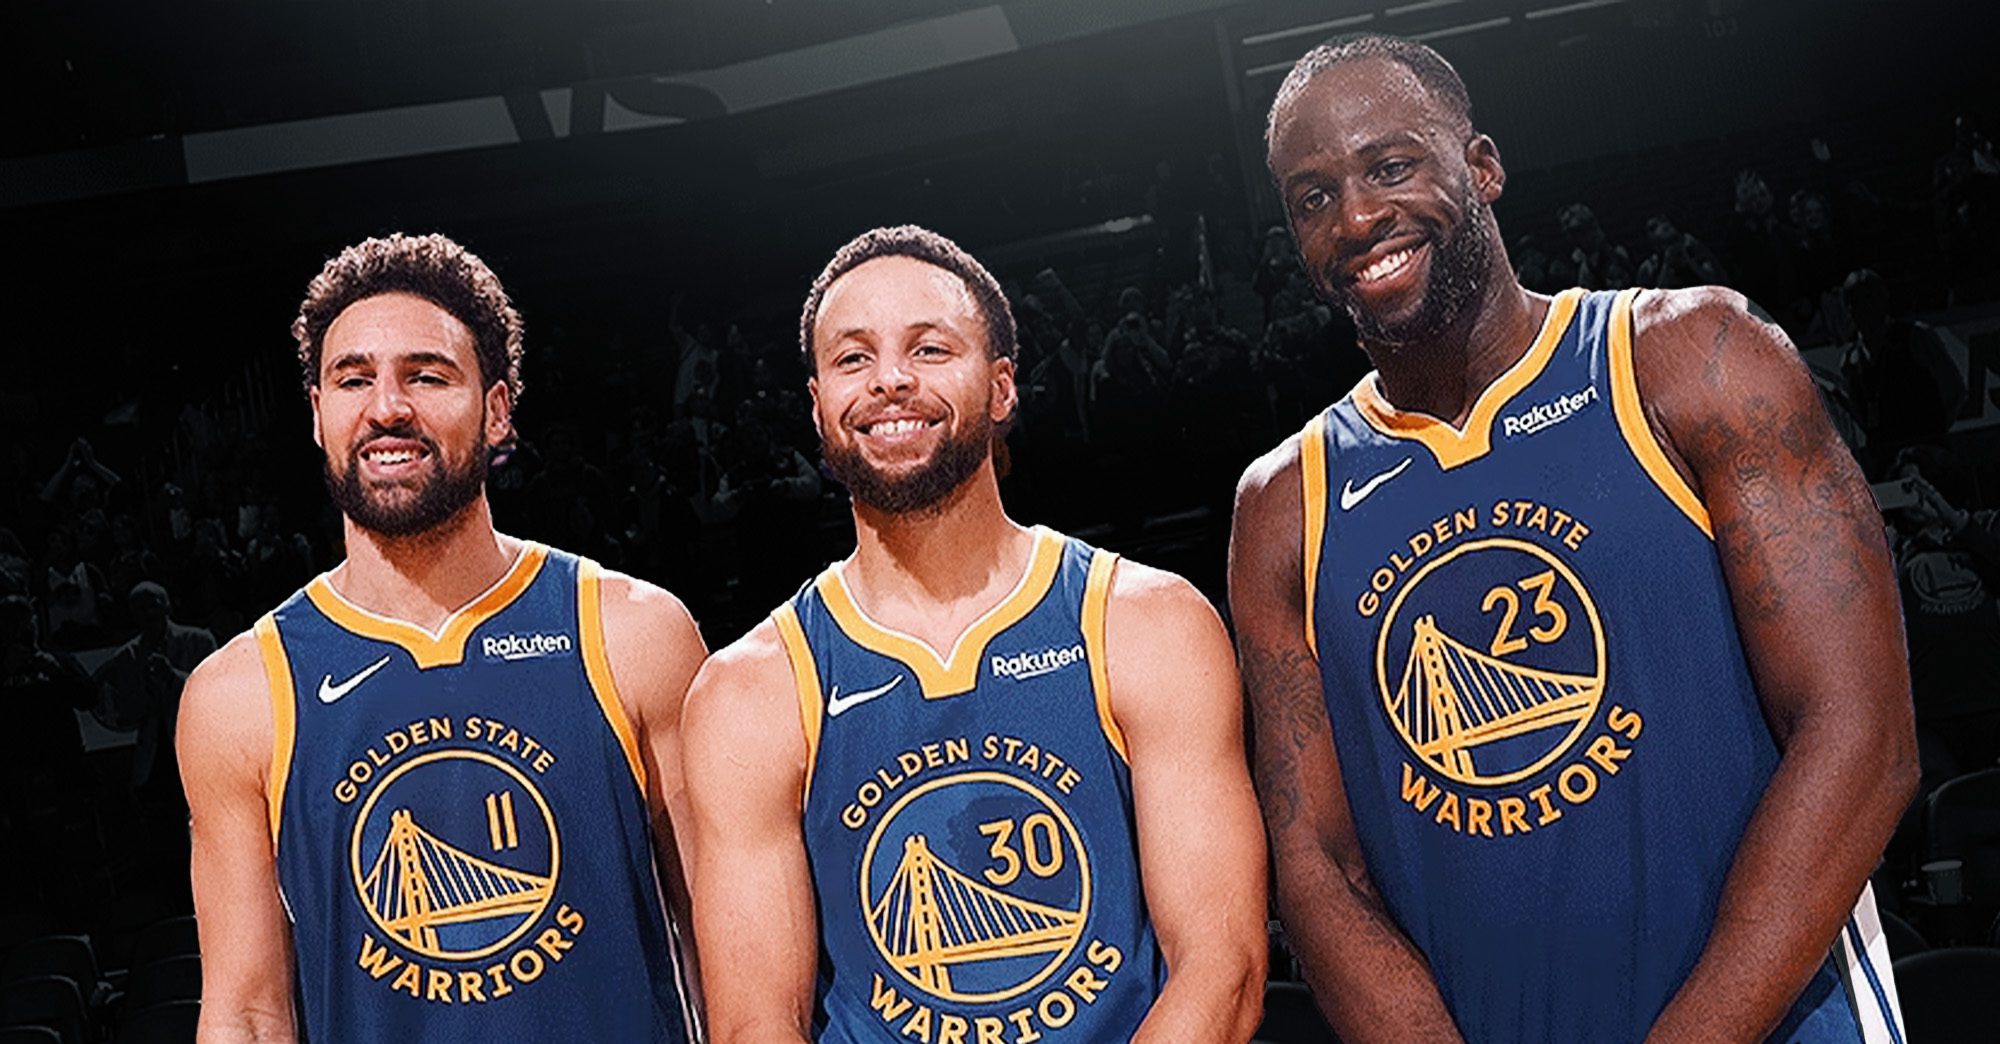 Steph Curry’s Take on His Future With Draymond Green & Klay Thompson